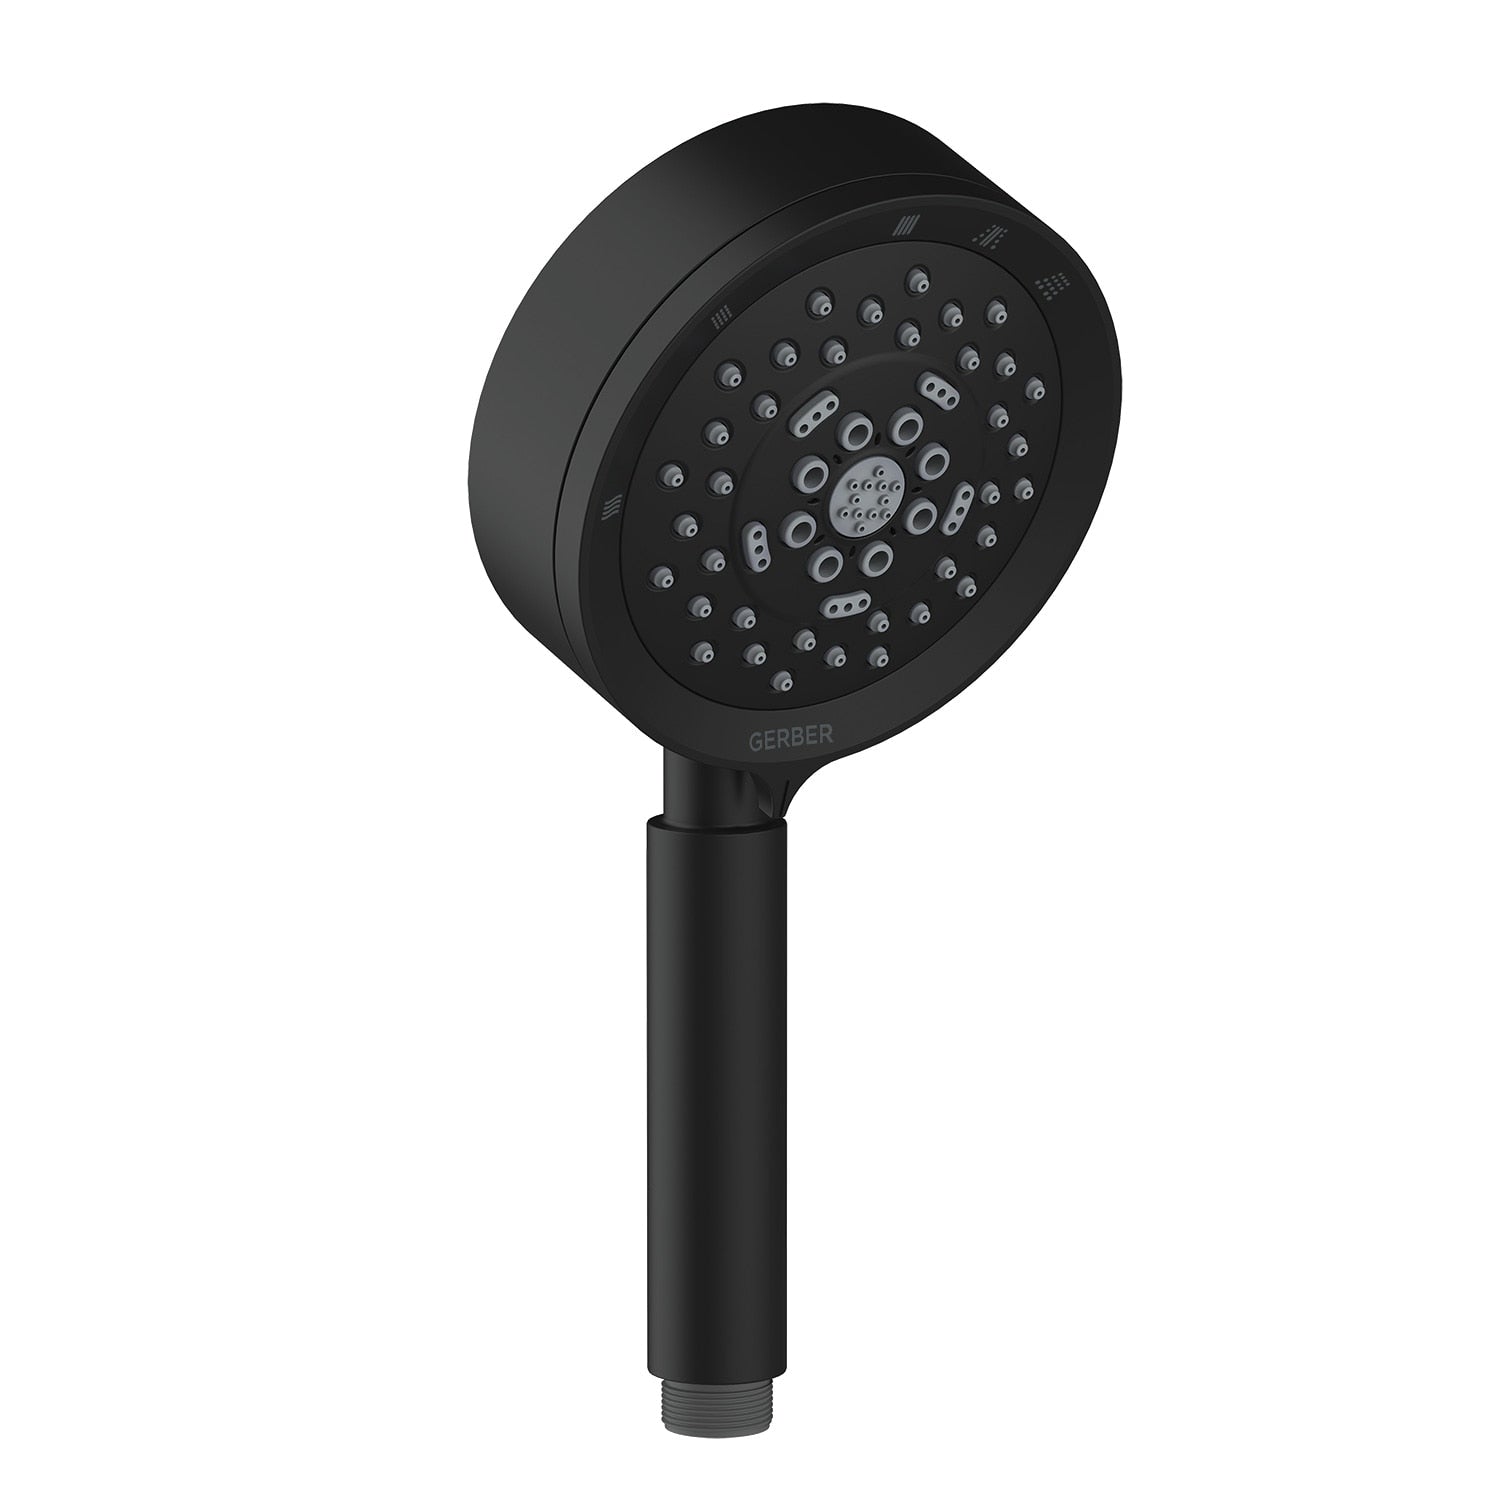 Danze by Gerber Parma 5 Function Handshower 1.5gpm